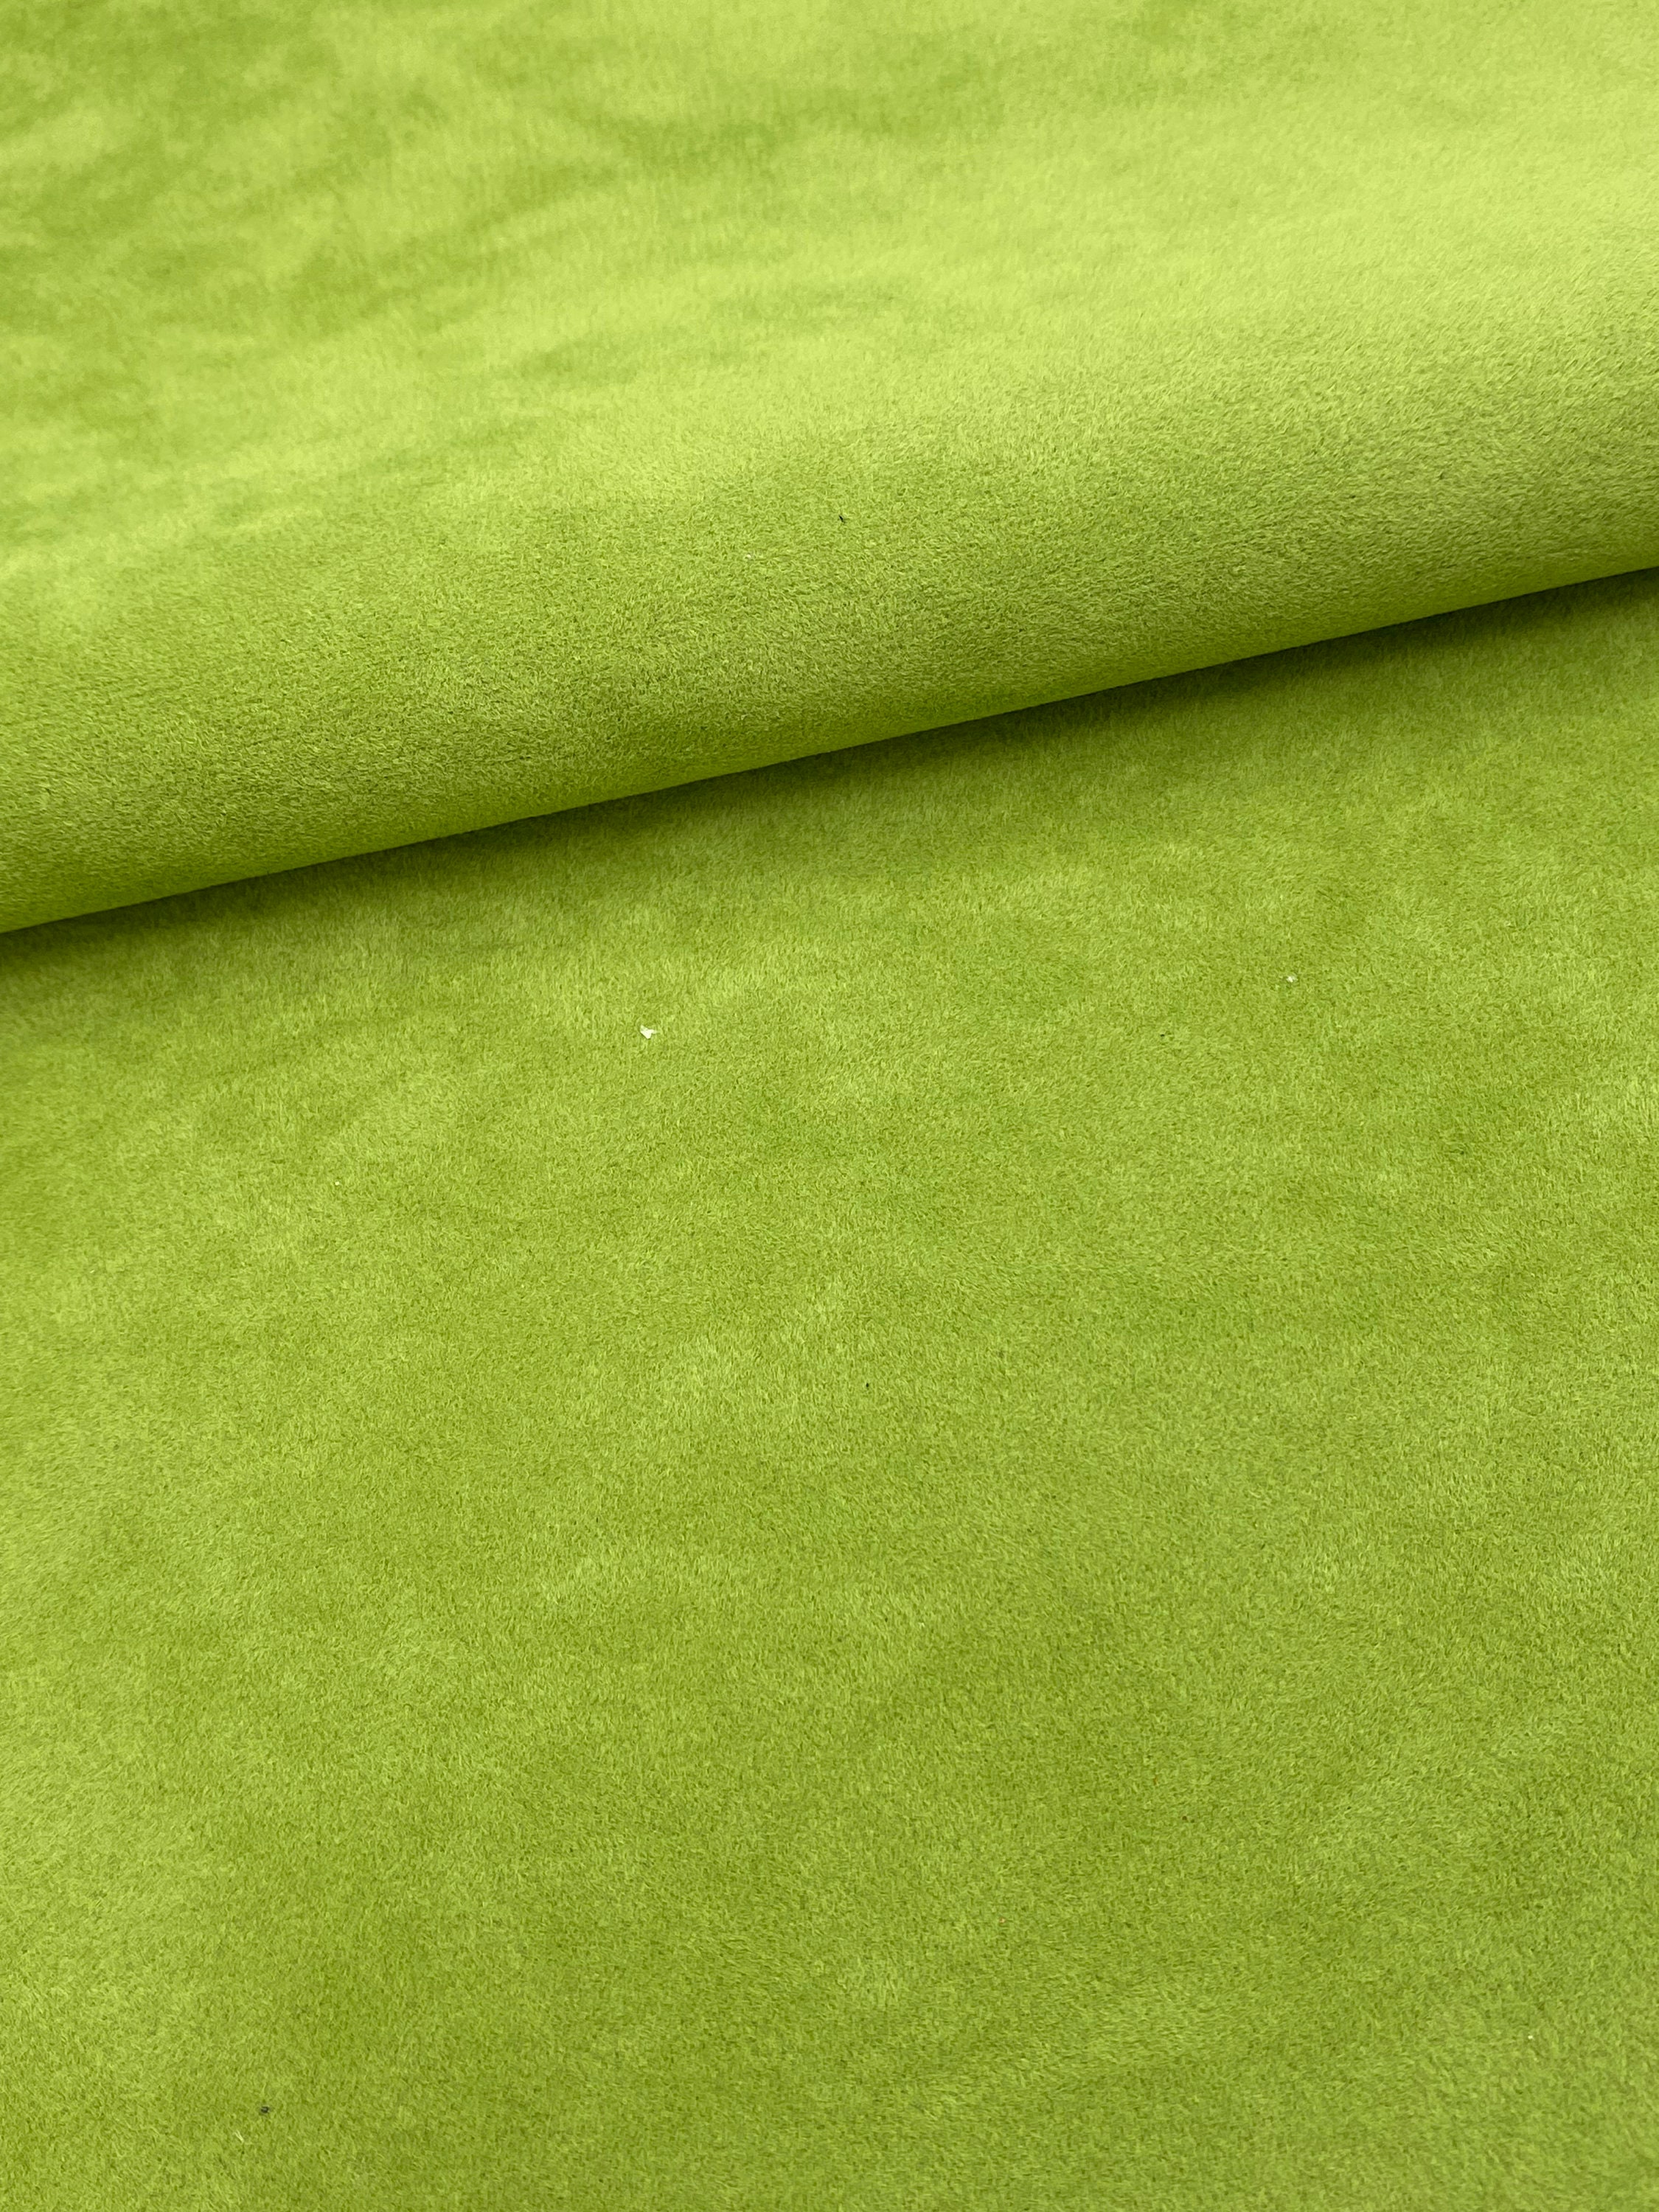 Etsy Green Fabric - Suede